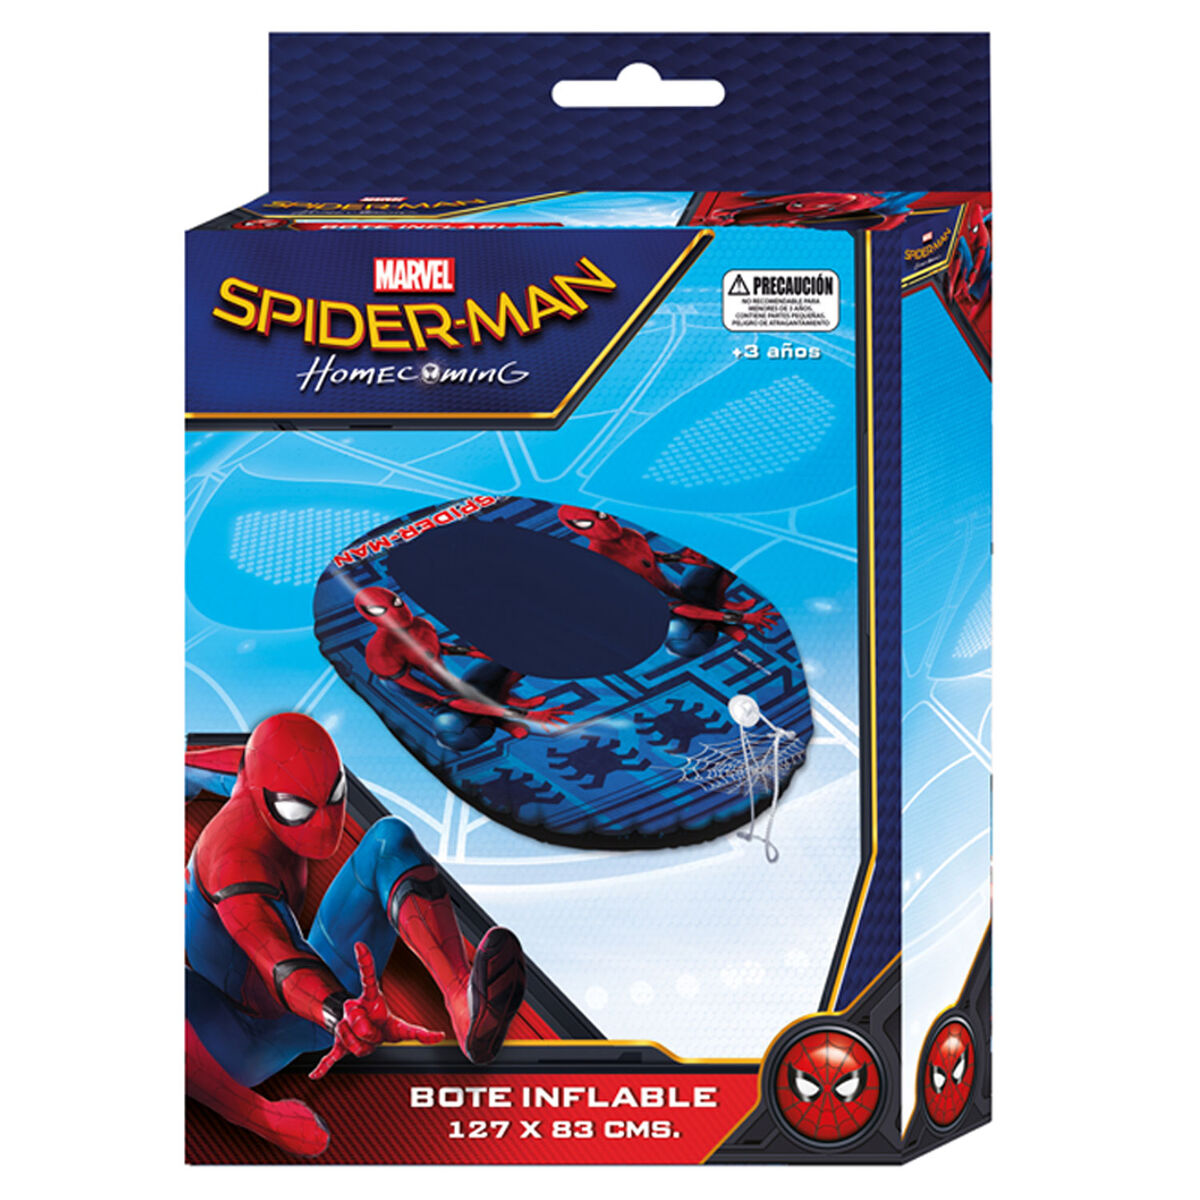 Bote Inflable Spiderman Marvel